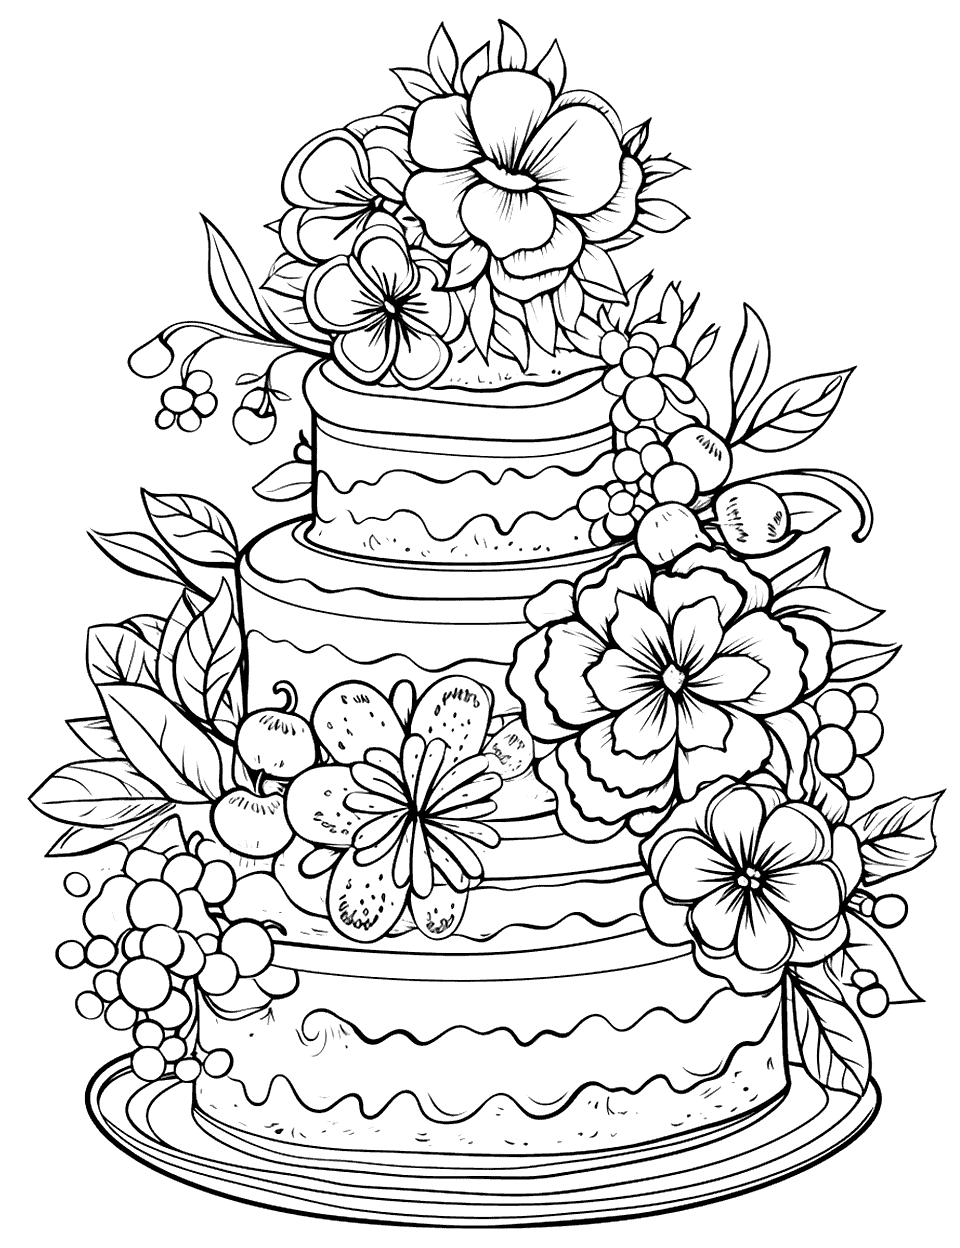 Floral Fantasy Cake Coloring Page - A cake covered in edible flowers and leaves.